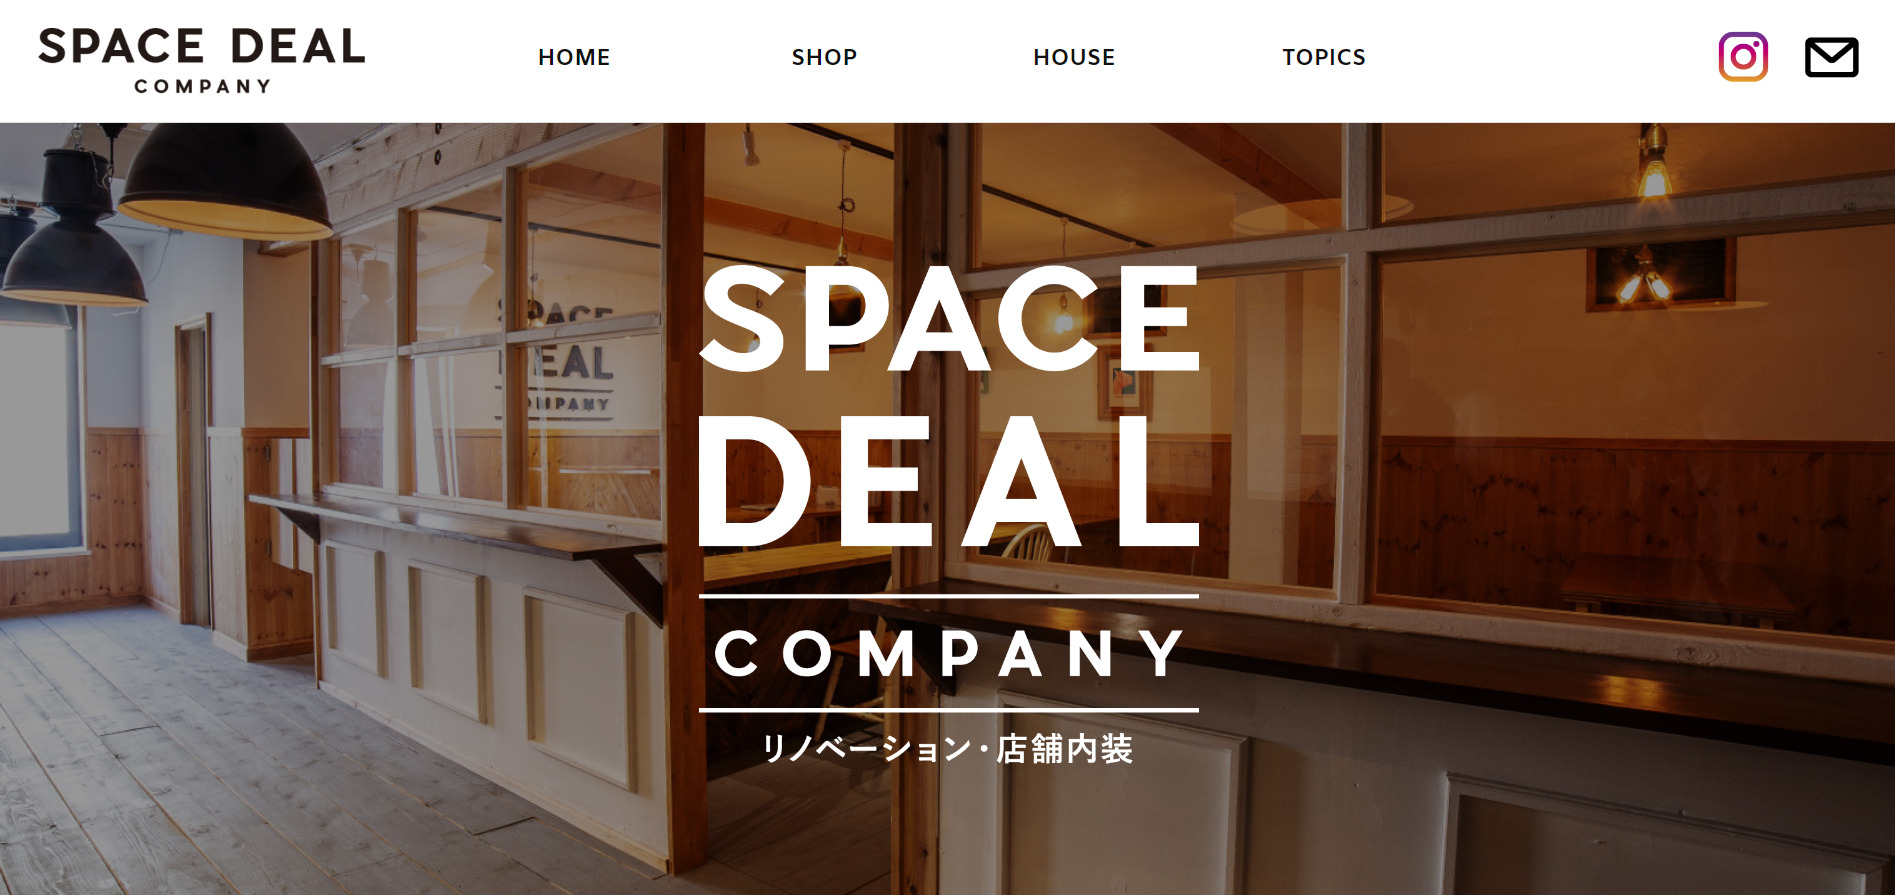 SPACE DEAL COMPANY